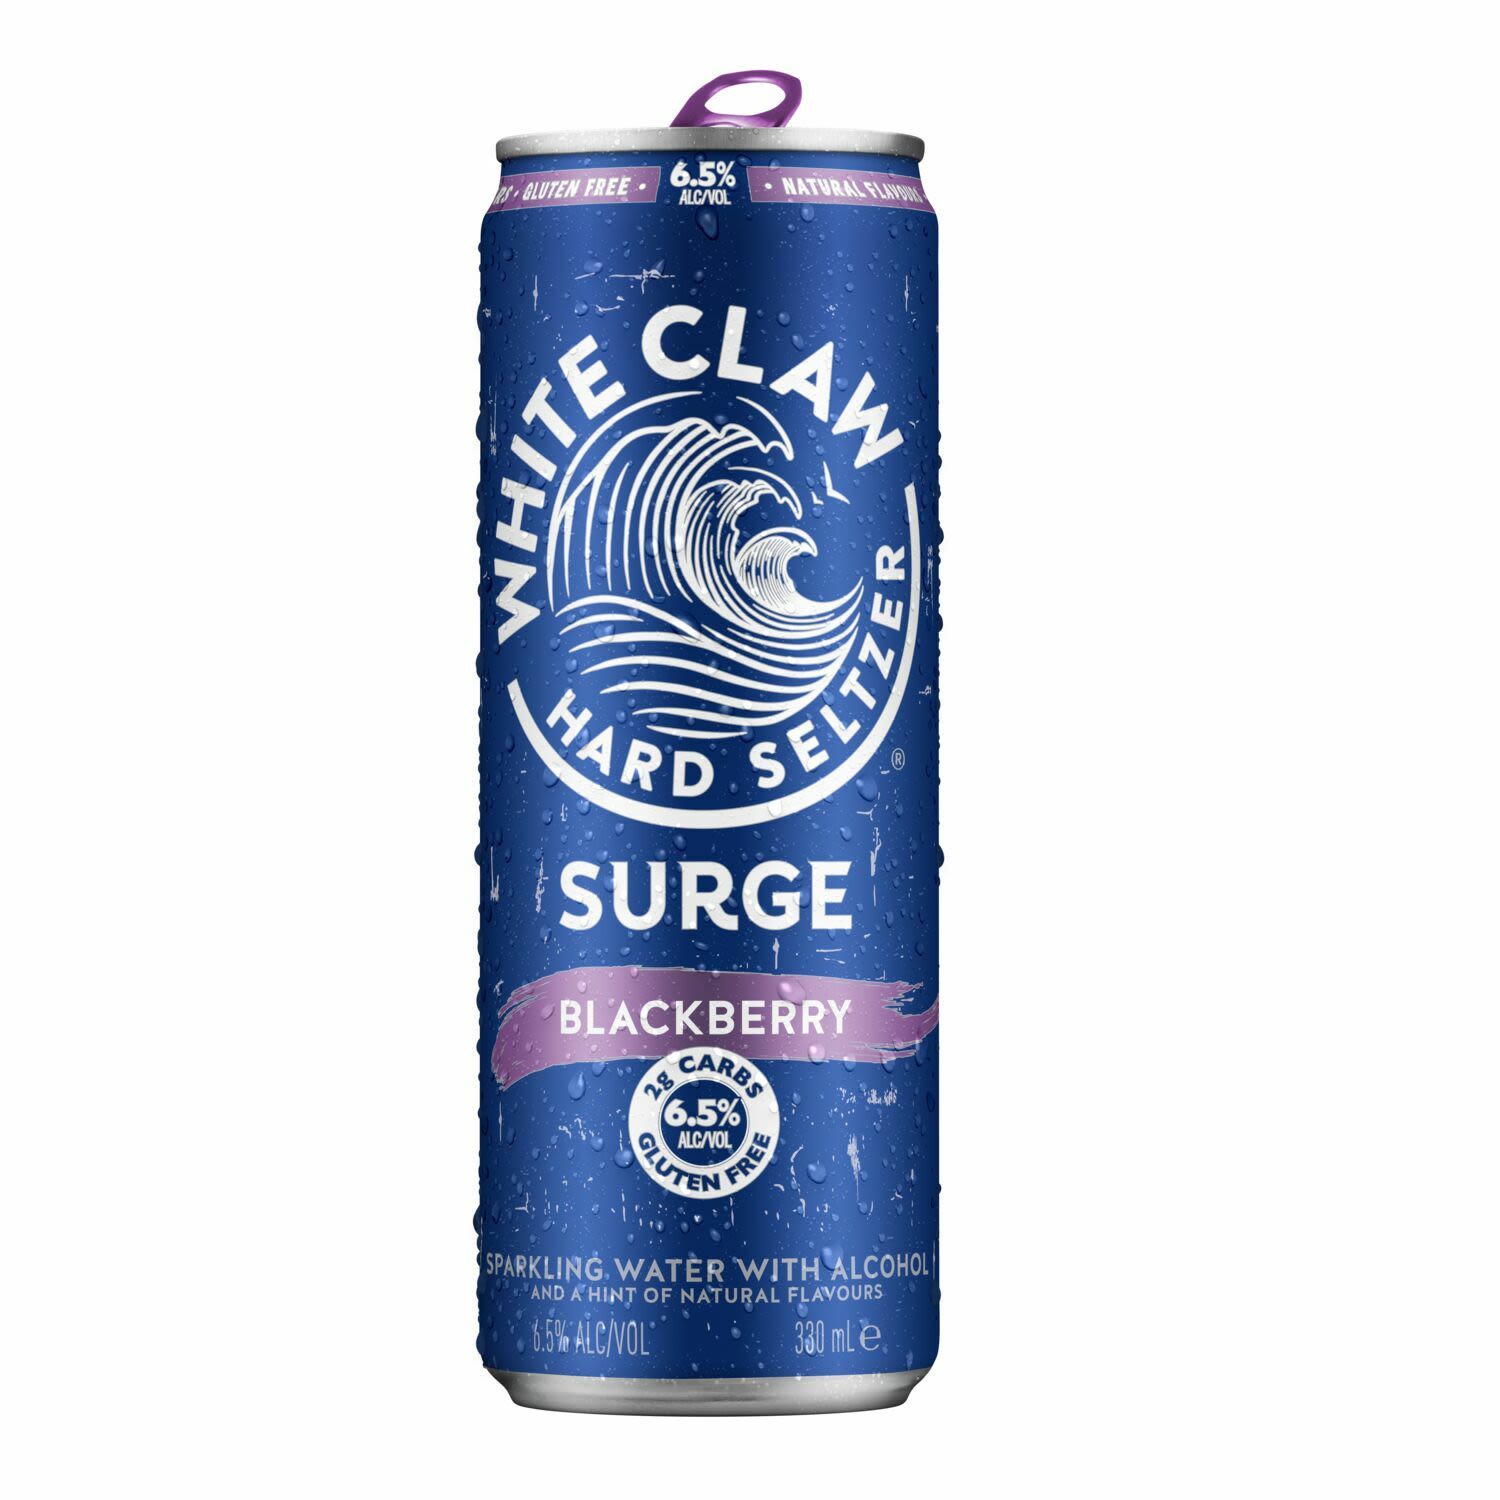 White Claw Hard Seltzer Surge Blackberry Can 330mL